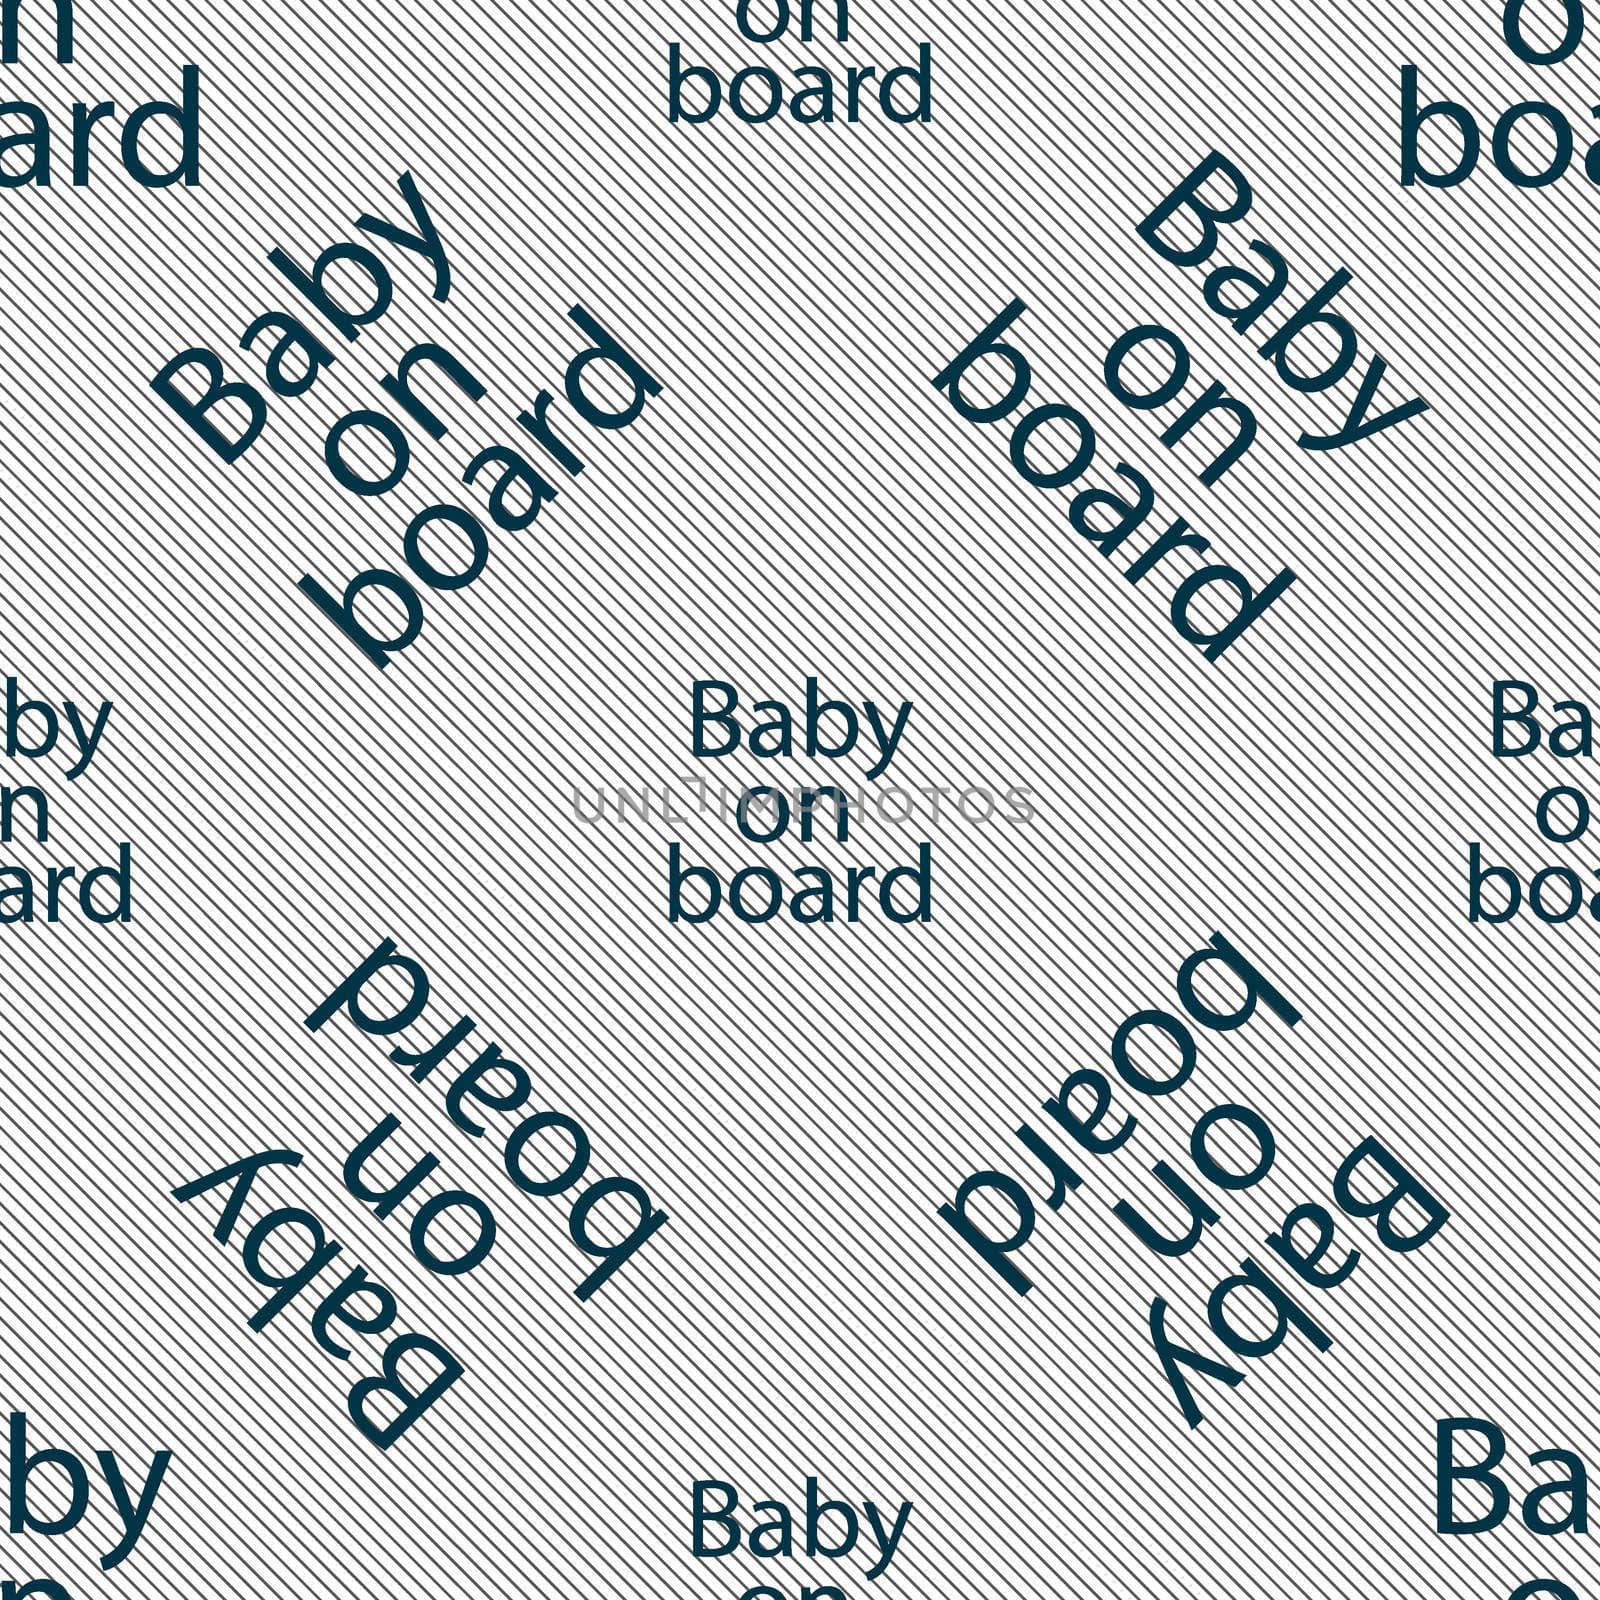 Baby on board sign icon. Infant in car caution symbol. Seamless pattern with geometric texture. illustration